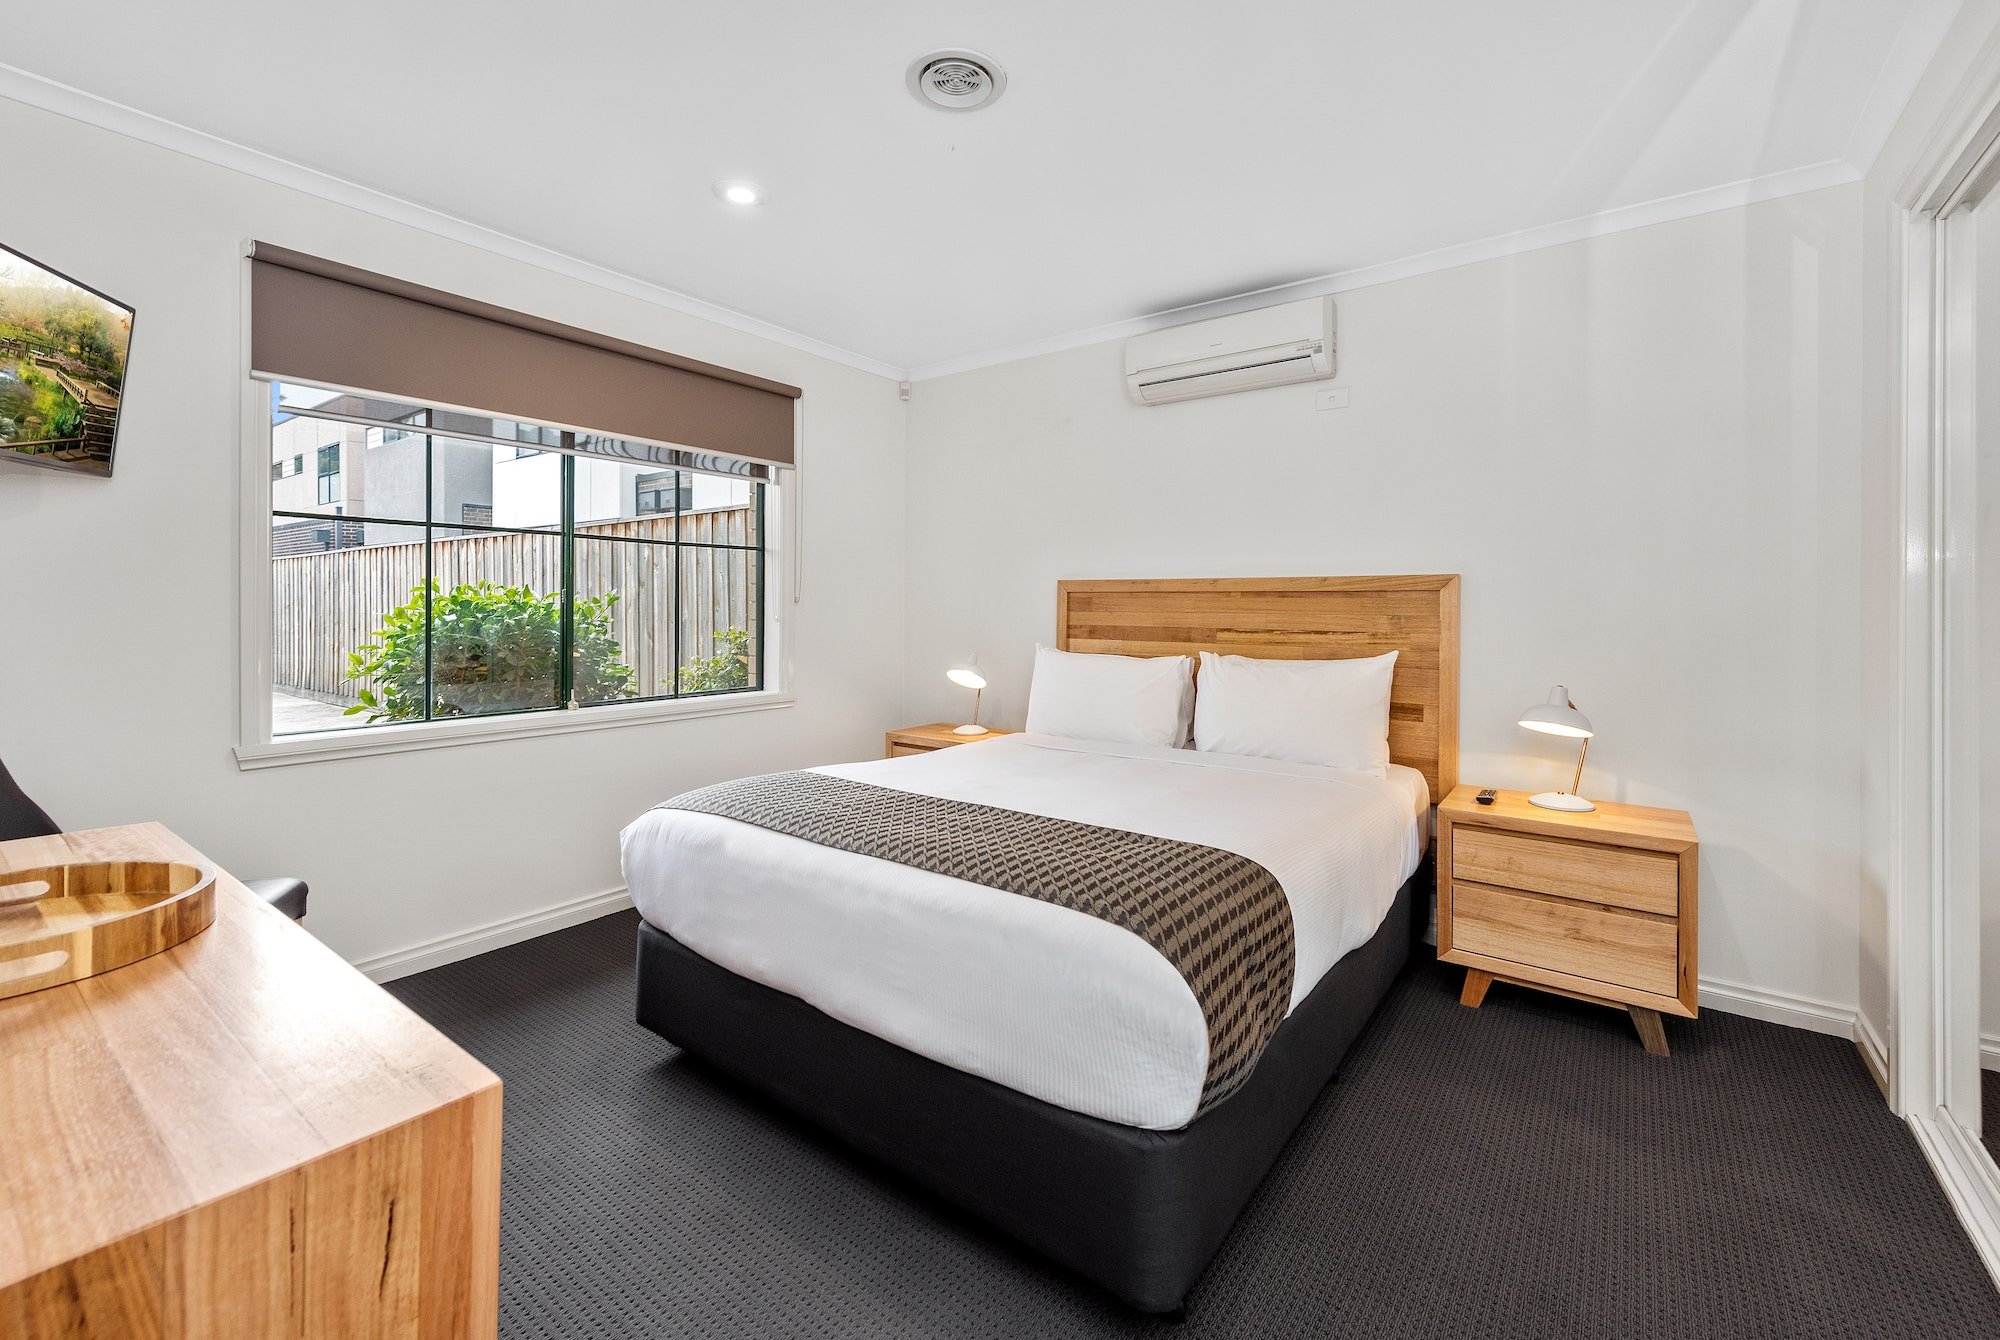 fawkner-executive-suites-and-serviced-apartments-accommodation-three-bedroom-villa-unit-4.jpg